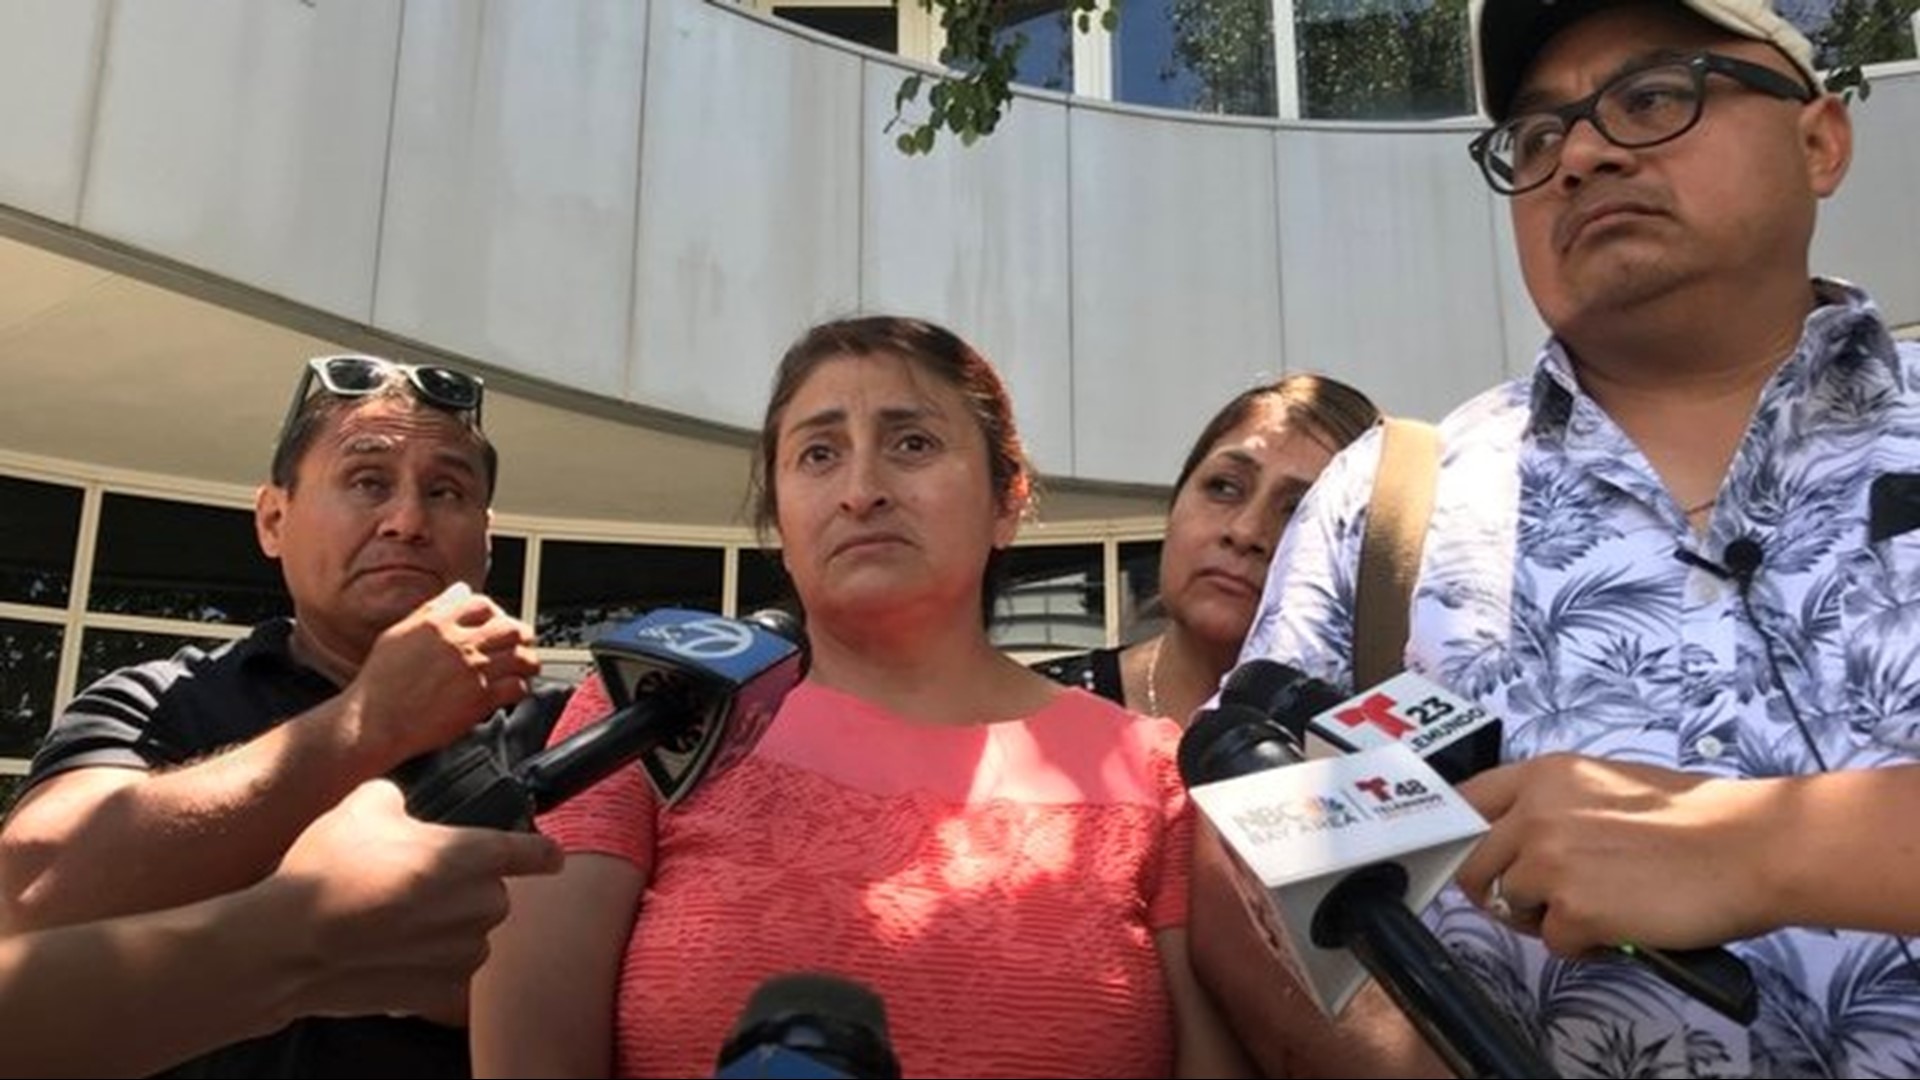 Moments of sheer panic raced over families at the Gilroy Garlic Festival on Sunday night. Laura Dominquez was at the Garlic Festival with her family when she said her 12-year-old daughter was shot while playing in a bounce house.